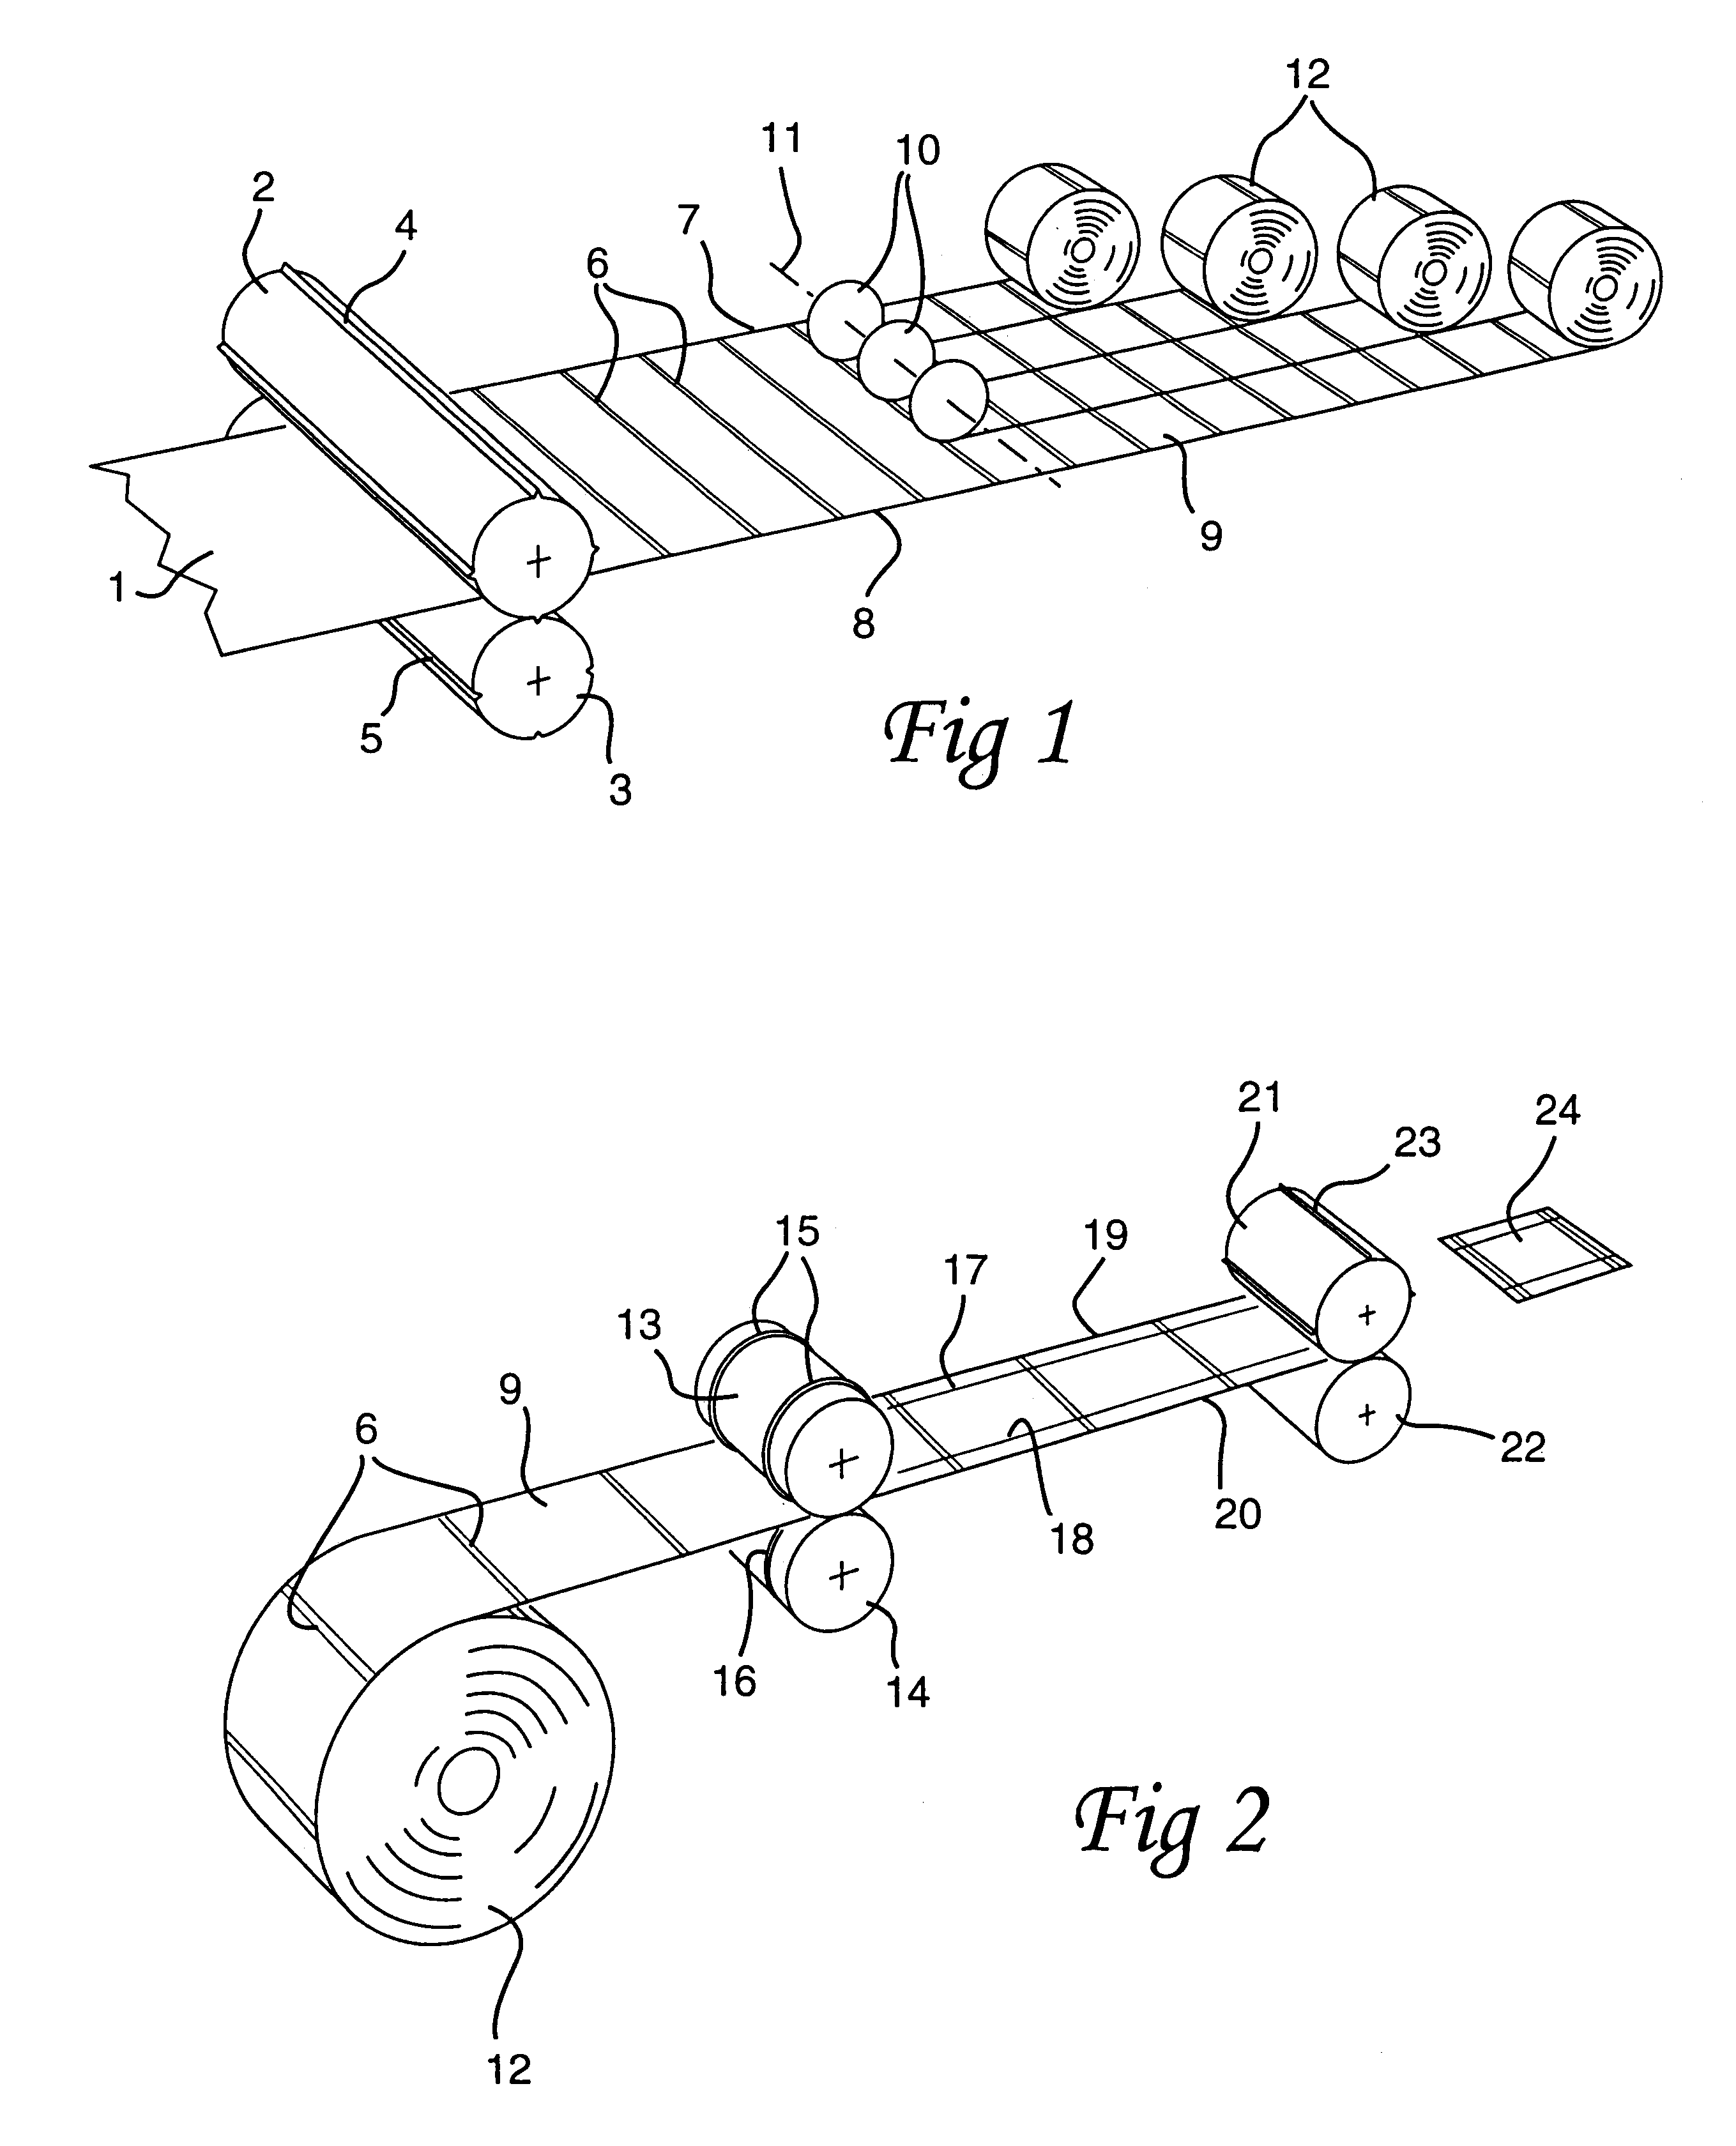 Method of producing crease-lined packaging material